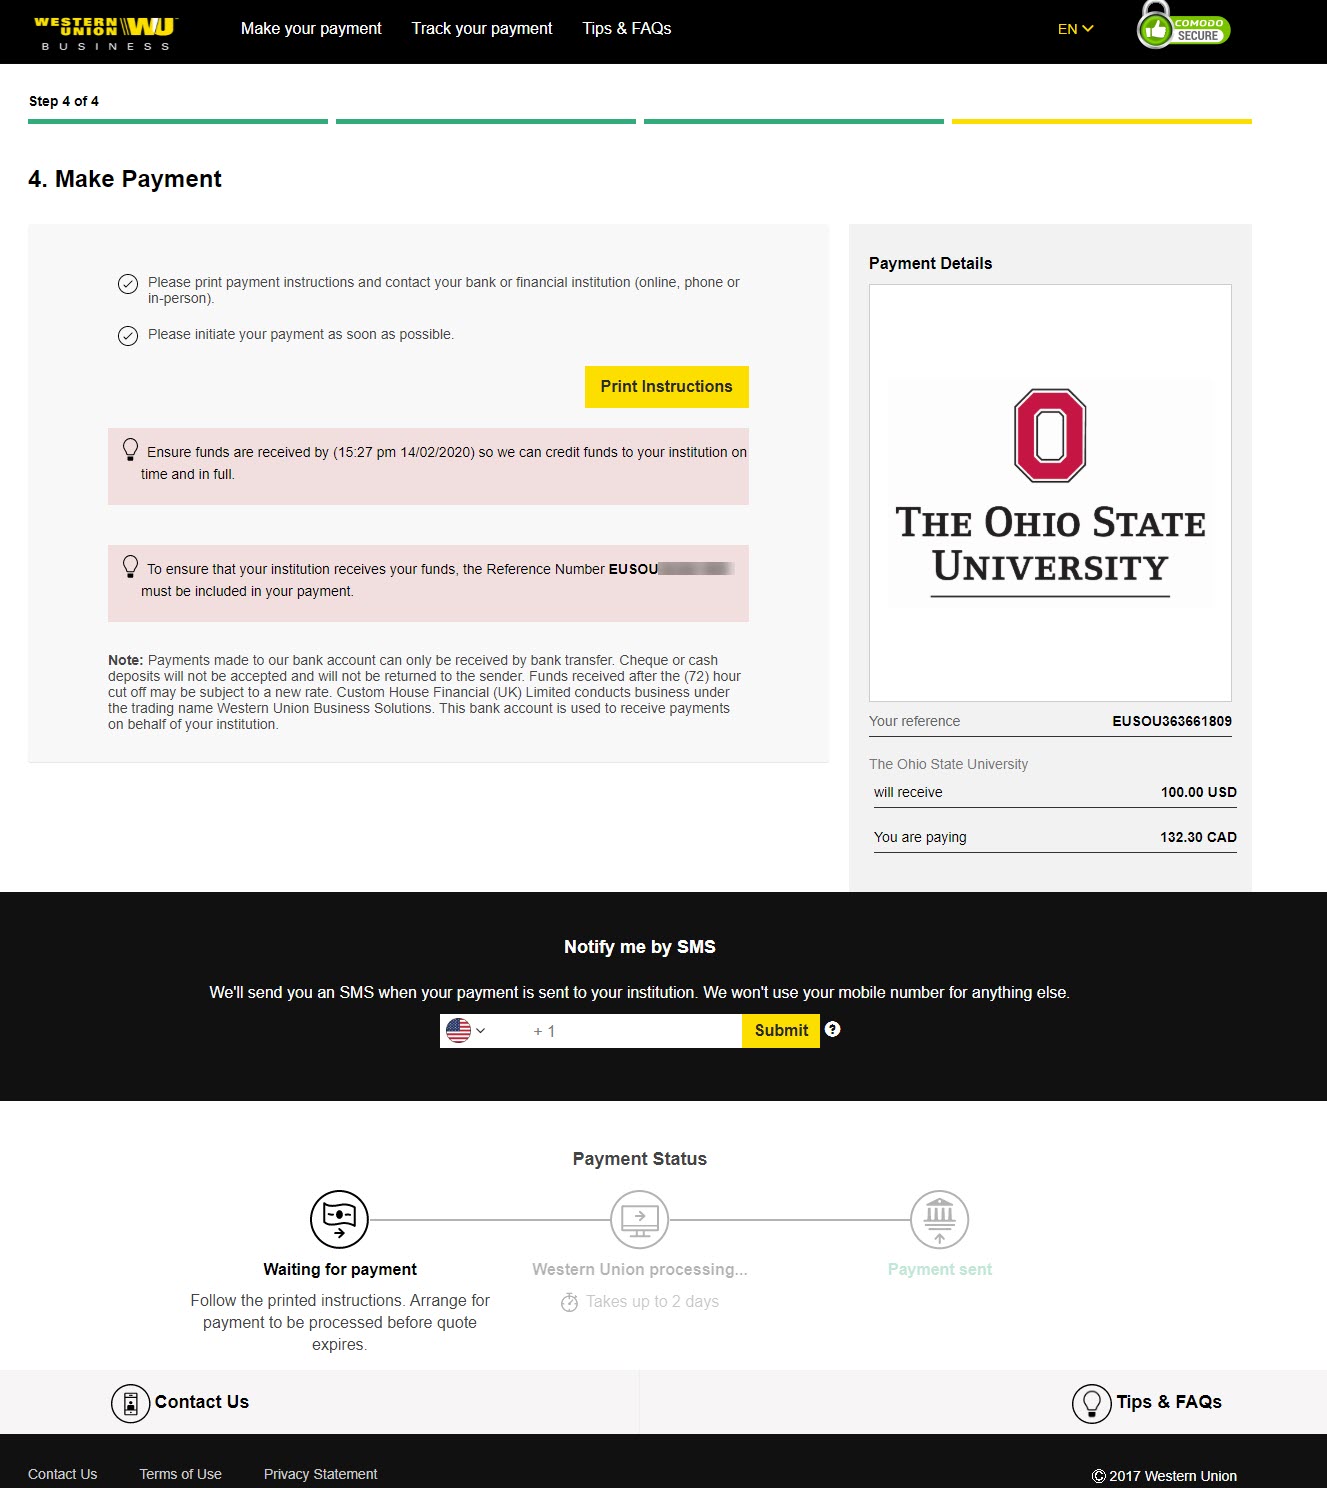 The Ohio State University Western Union payment portal, Step 4 of 4 of the Get a quote process - Make a Payment page. This page contains a Print instructions button. and a Notify me by SMS  and a field to enter a phone number and a submit button